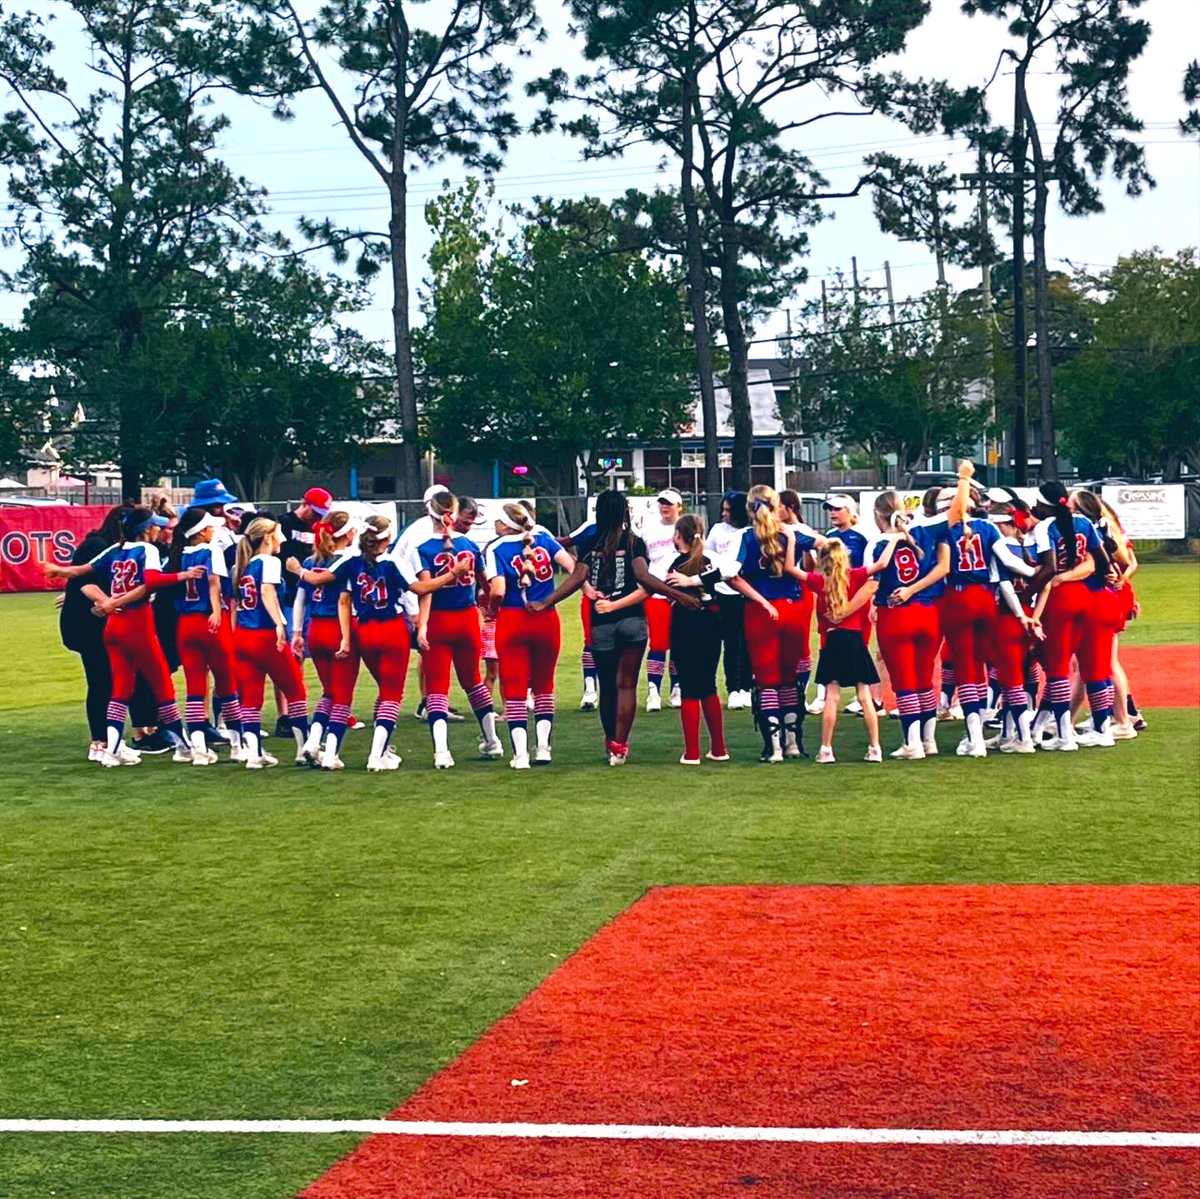 A great win against a great team! Next up semifinals!!! #JohnCurtisLadyPats ❤️💙 #SulphurBound #LetsGeaux